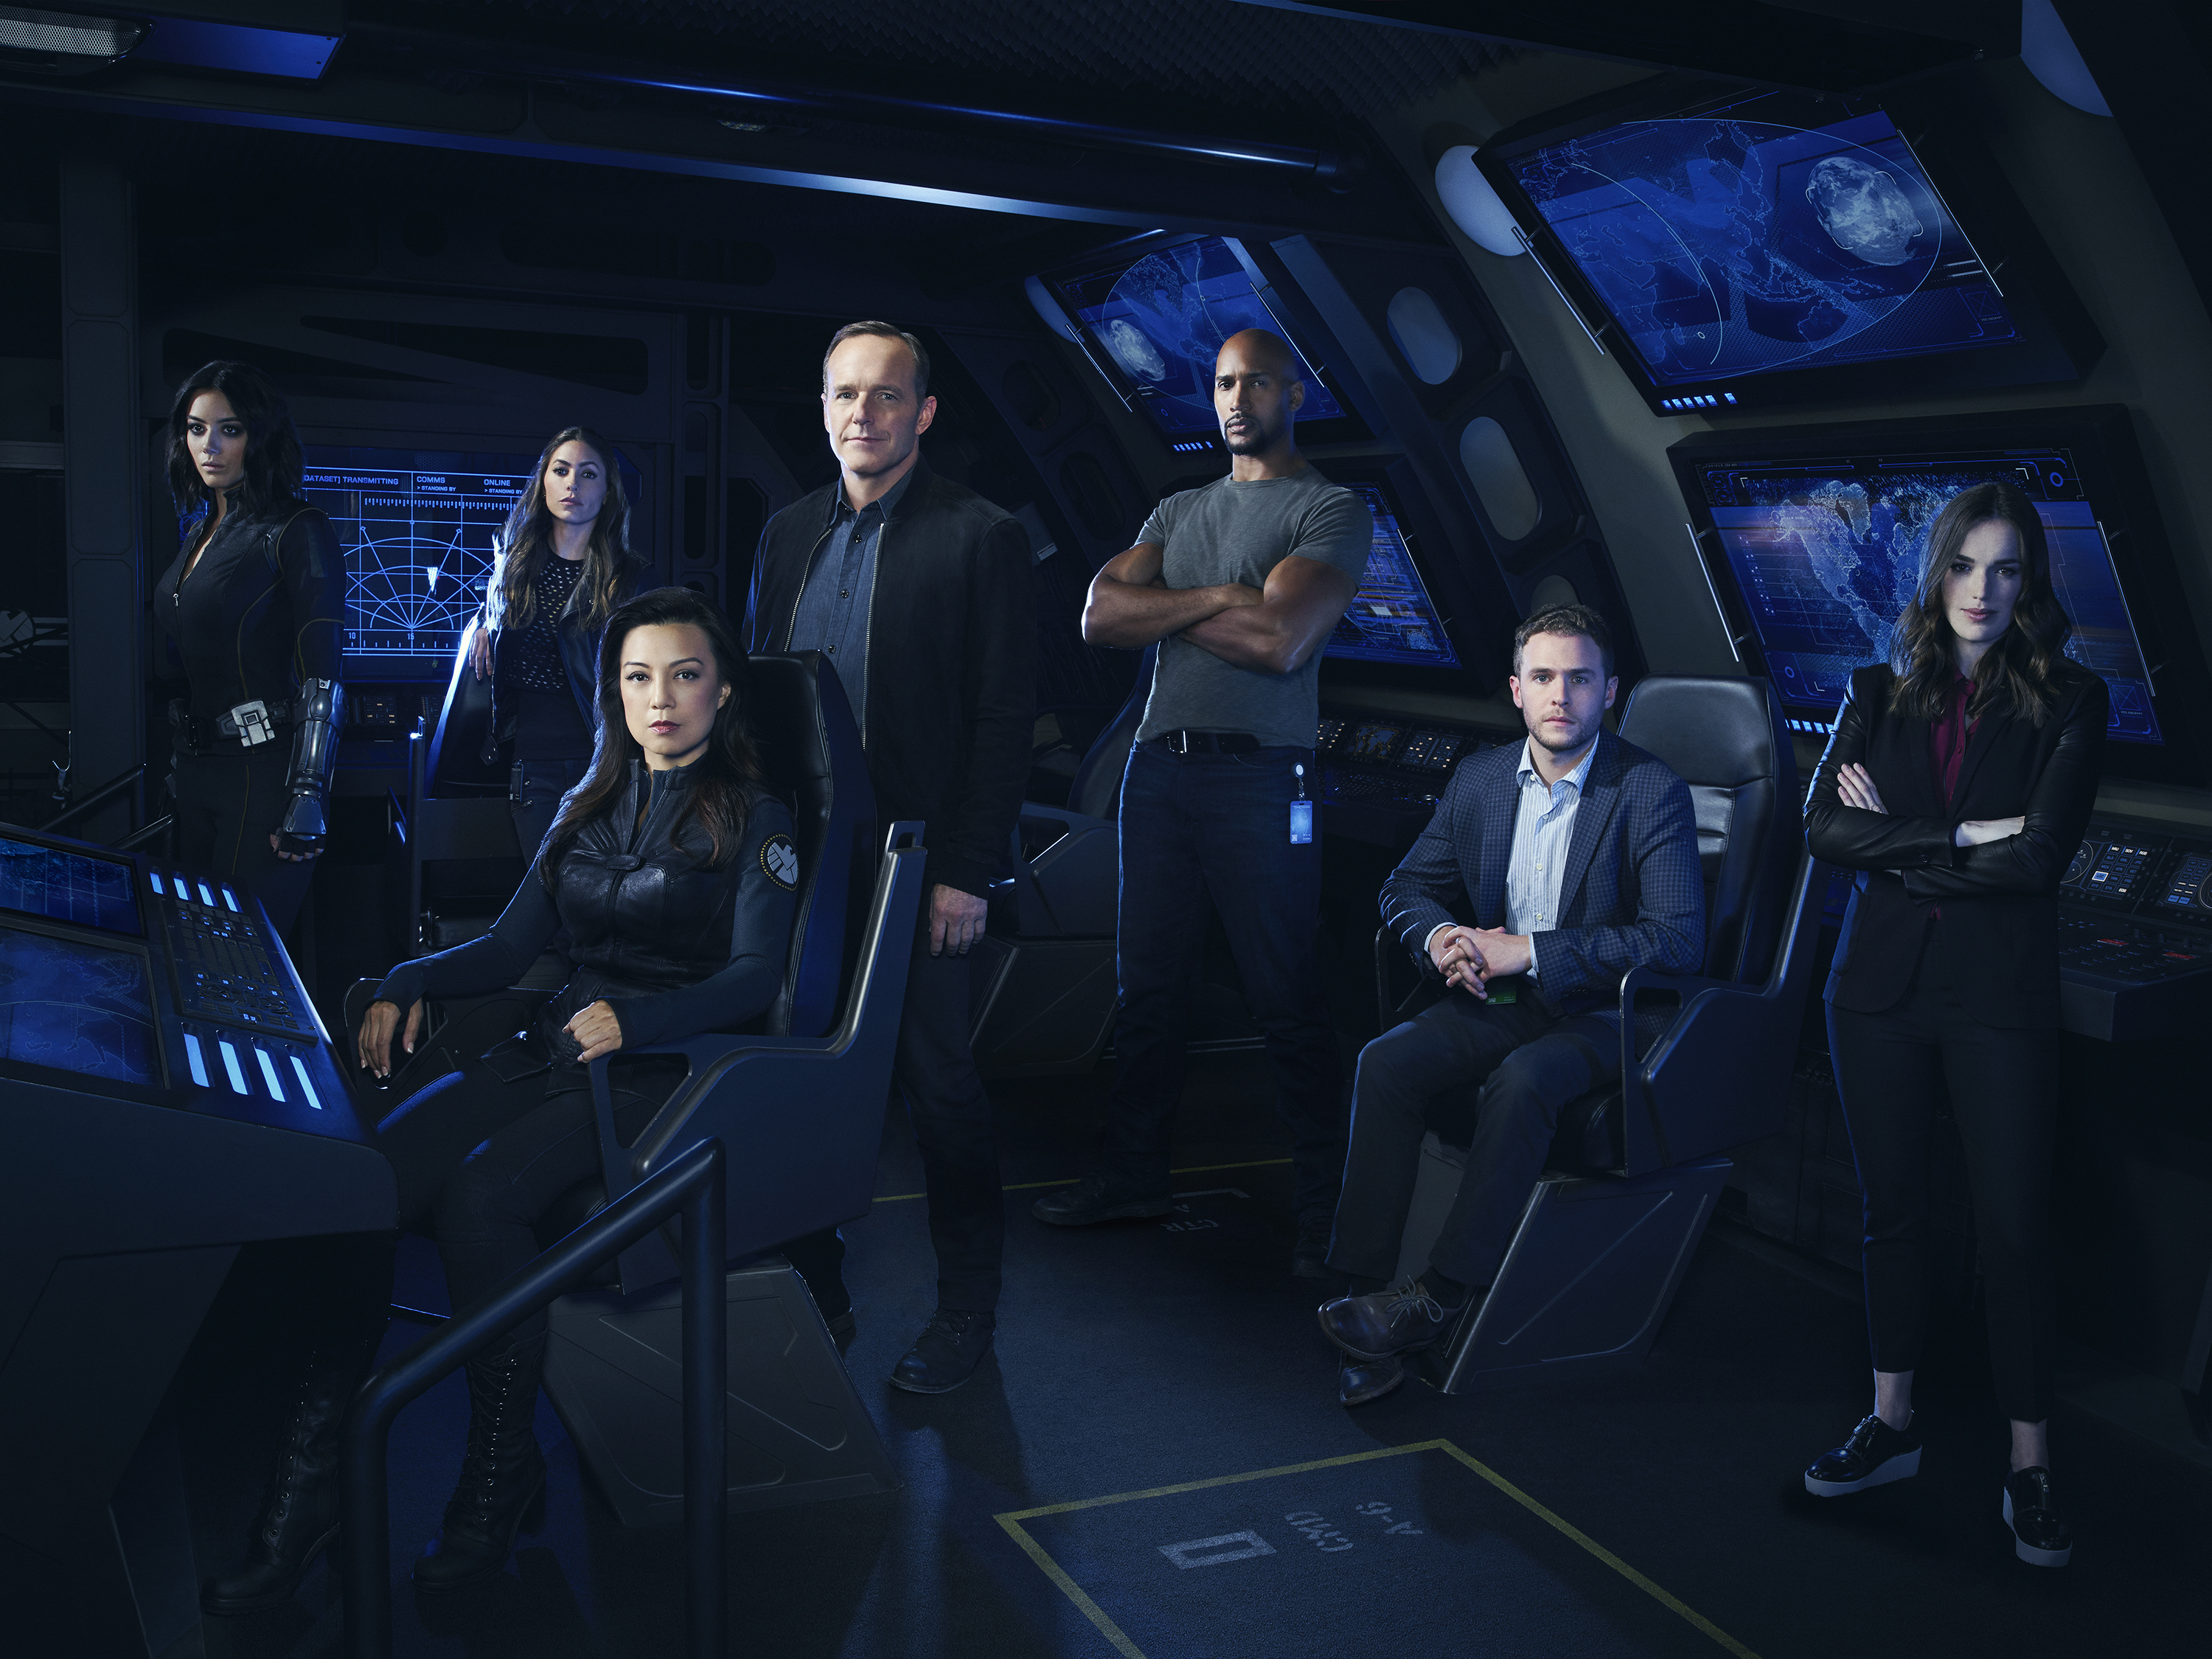 S.H.I.E.L.D' Agents Are 'Lost in Space' for Season 5 | Space